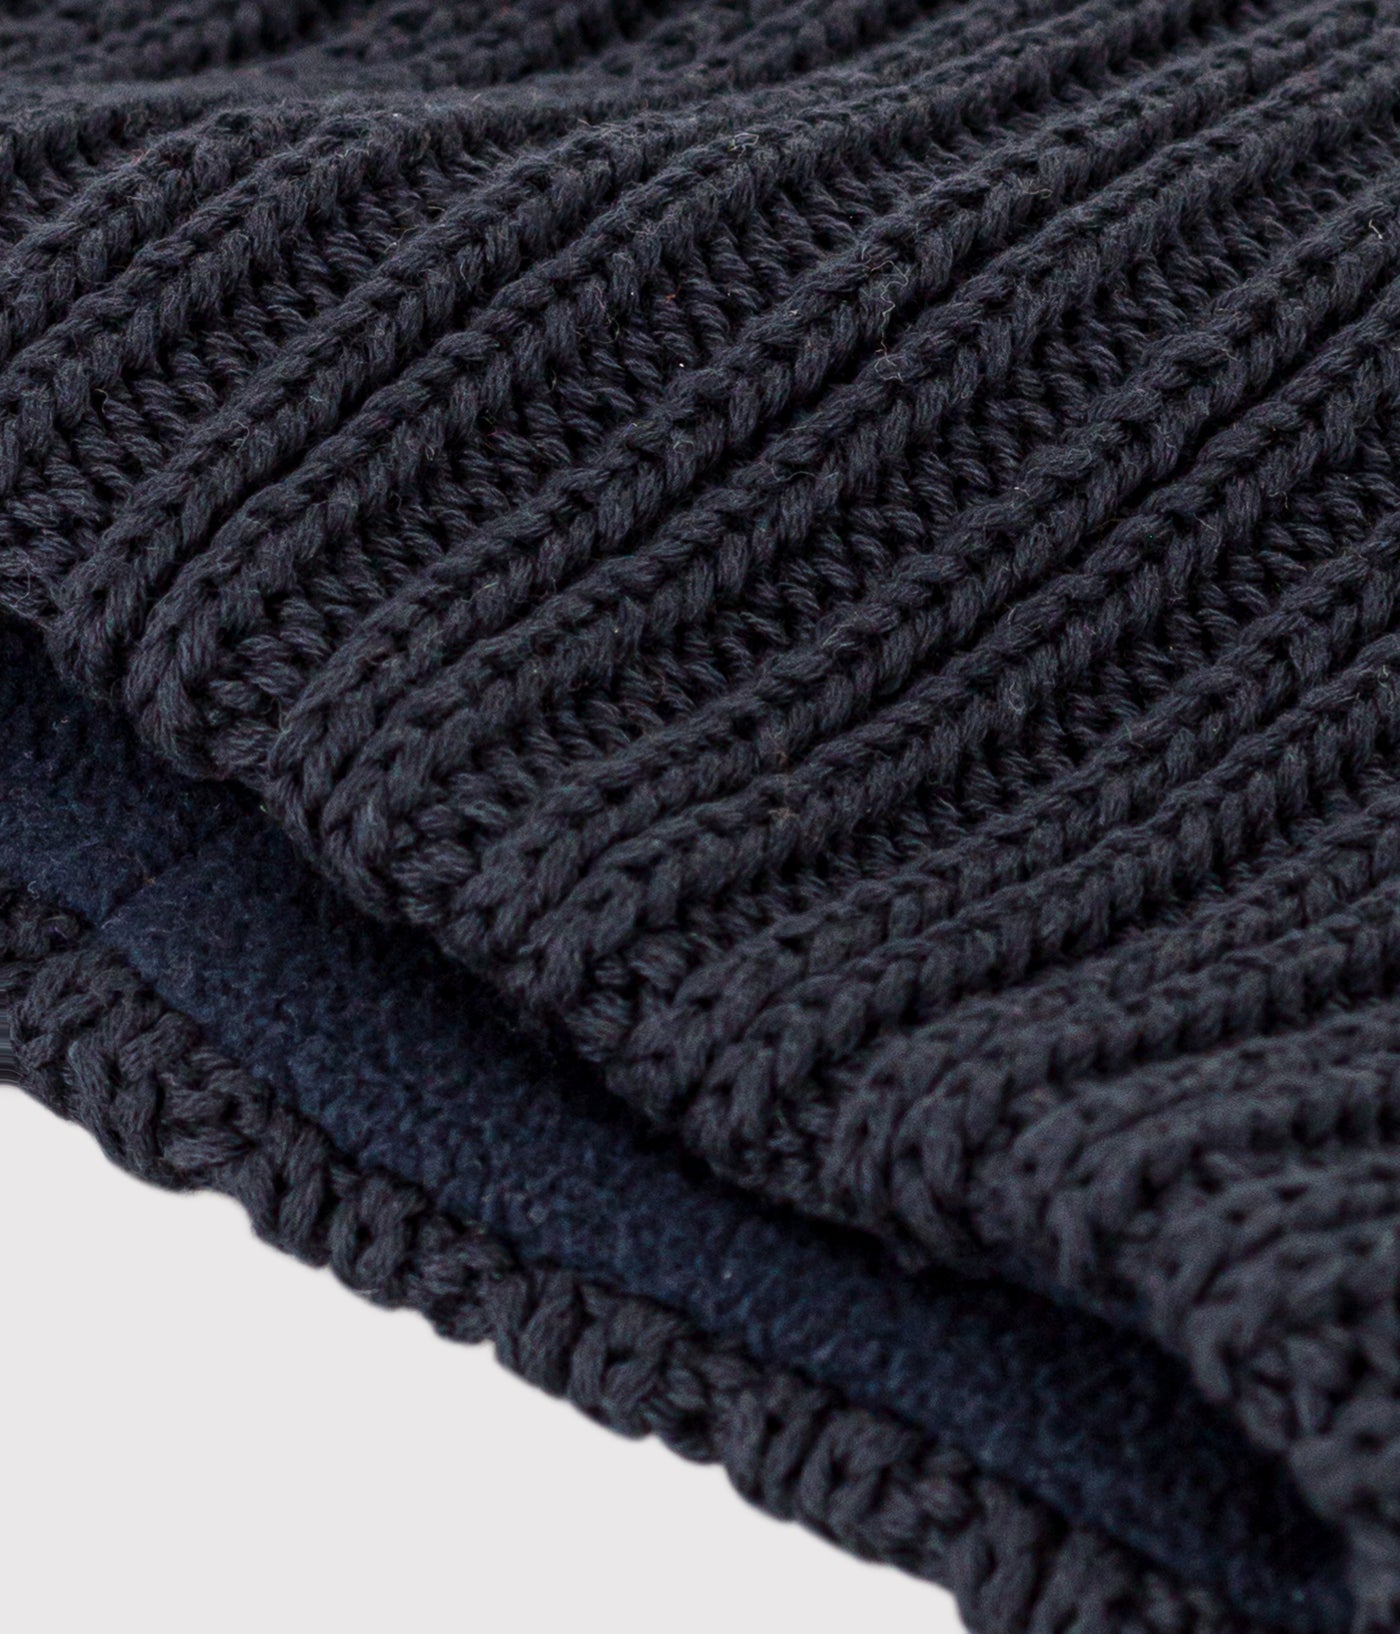 UNISEX FLEECE-LINED KNITTED SNOOD